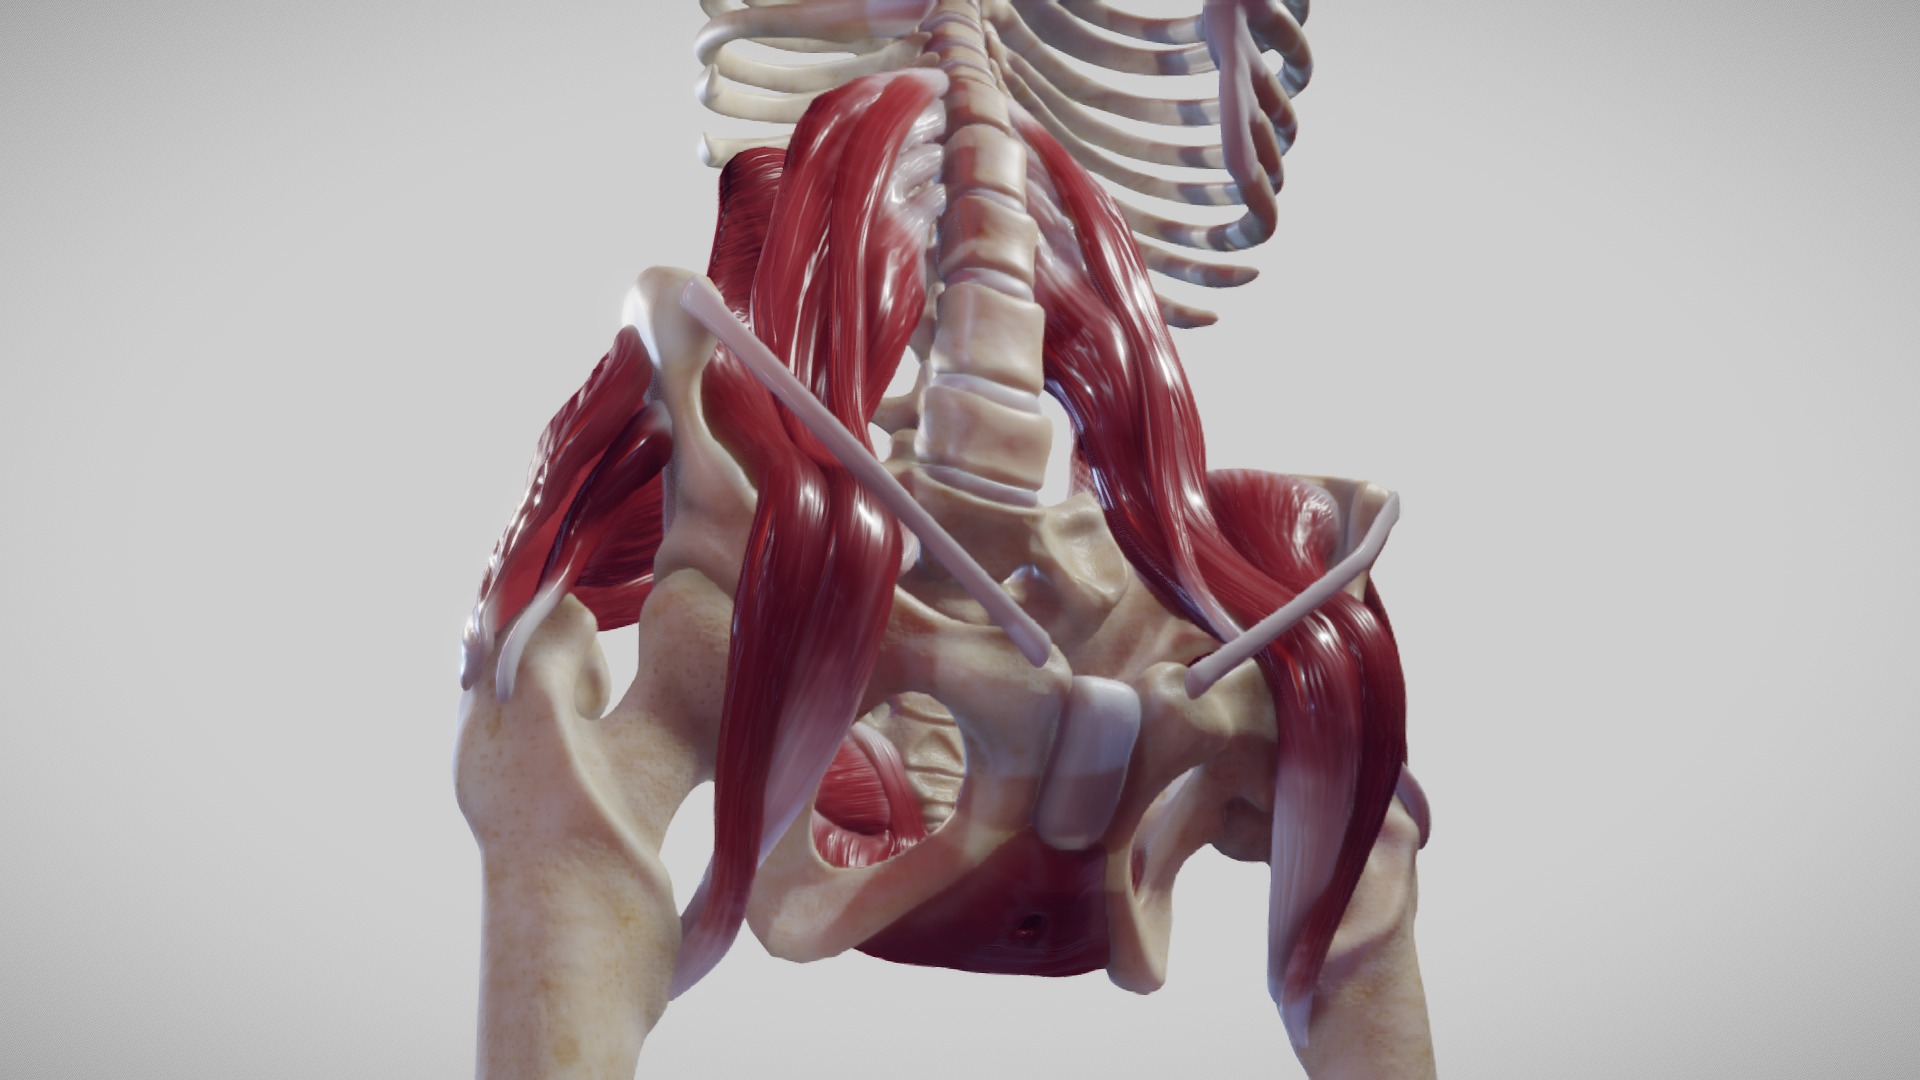 3D model The Pelvic Floor And Post Abdominal Wall Muscles - This is a 3D model of the The Pelvic Floor And Post Abdominal Wall Muscles. The 3D model is about a hand holding a red and white octopus.